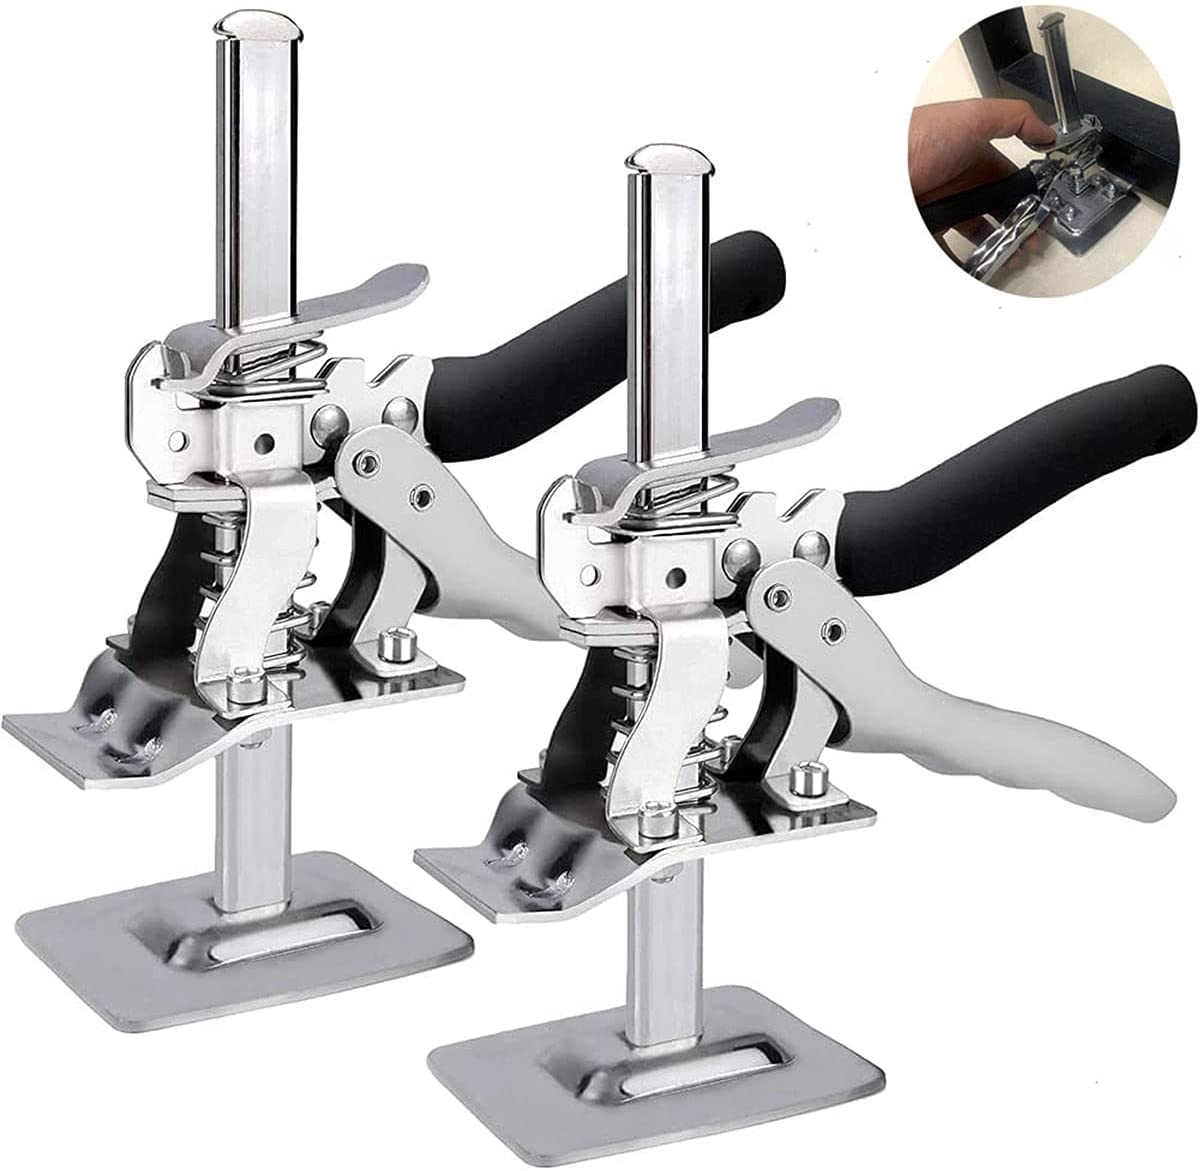 2 Packs Hand Lifting Tool Jack, Labor-saving Arm Jack, The Height can be  Raised by 5-100mm, Door Panel Drywall Lifting Cabinet, Up to 265 lb, Board